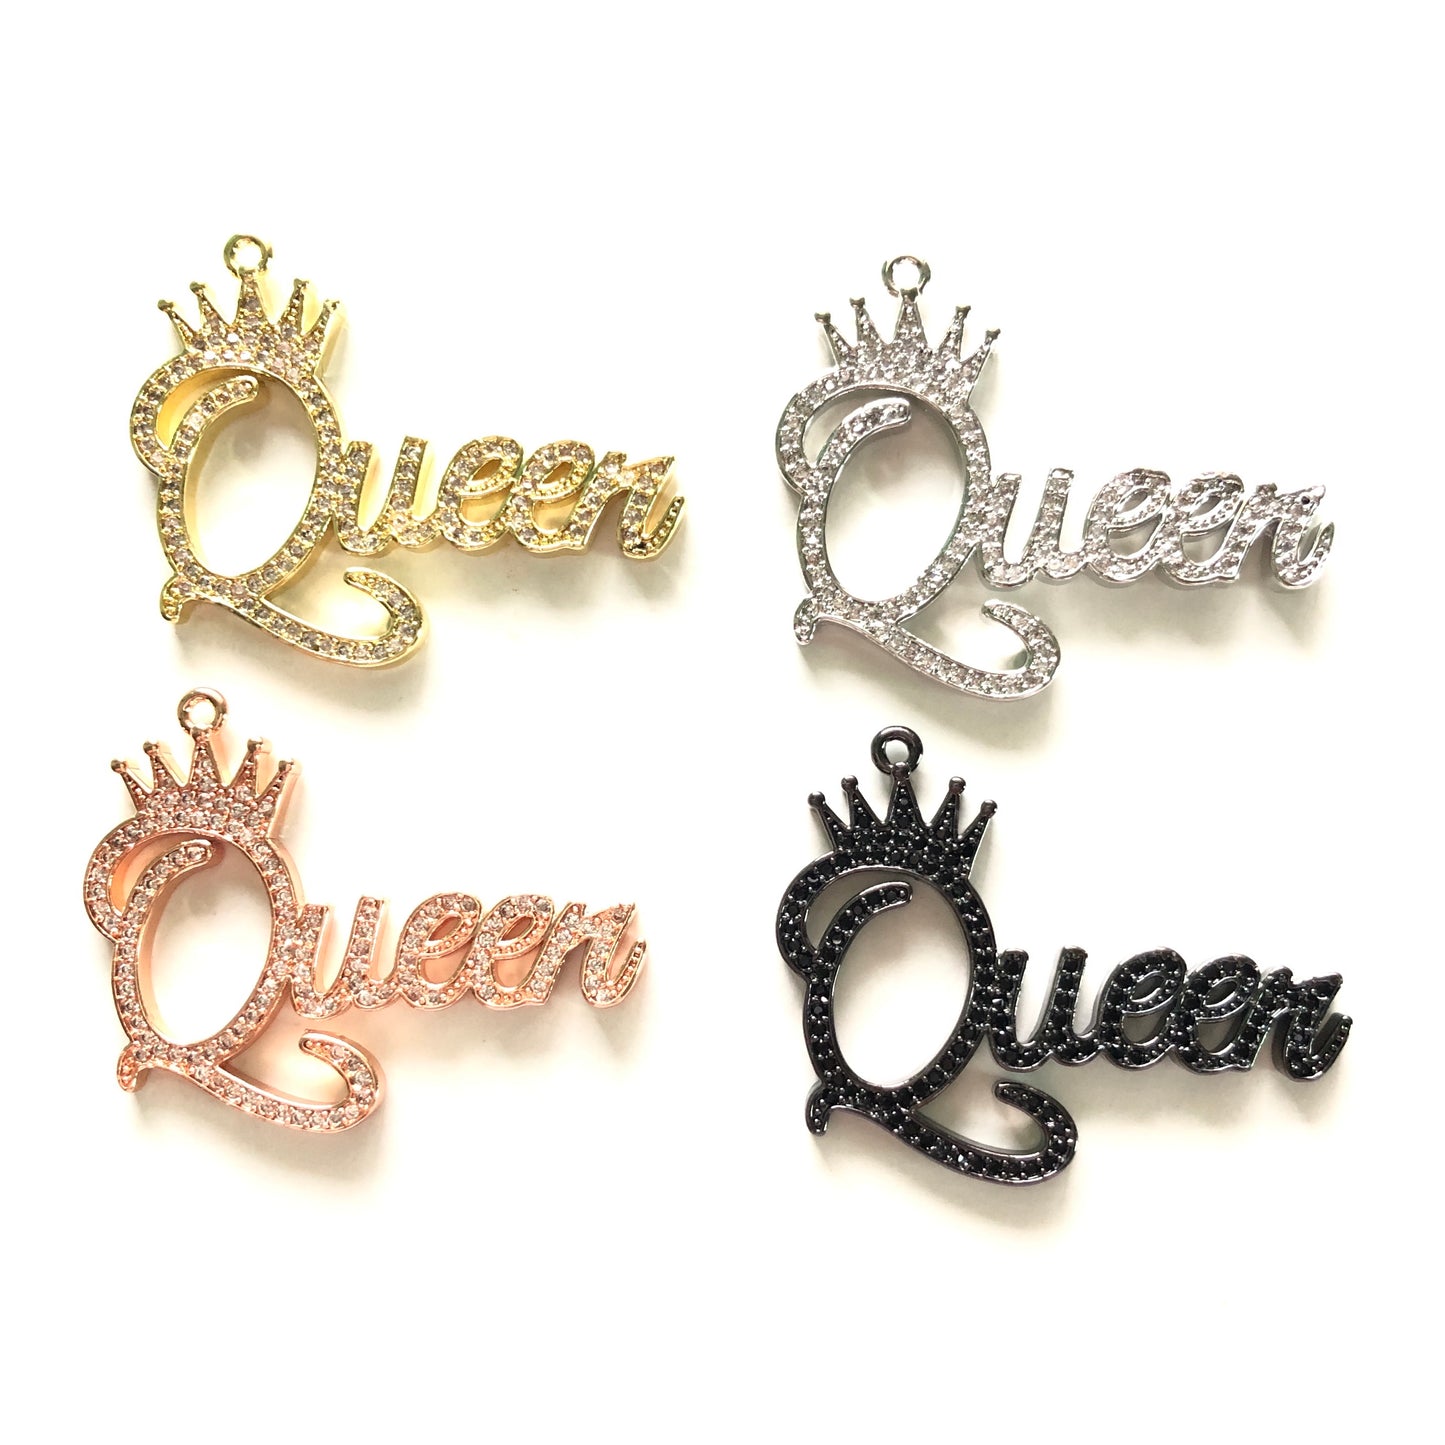 10pcs/lot 39*30mm CZ Paved Crown Queen Word Charms CZ Paved Charms Crowns Queen Charms Words & Quotes Charms Beads Beyond